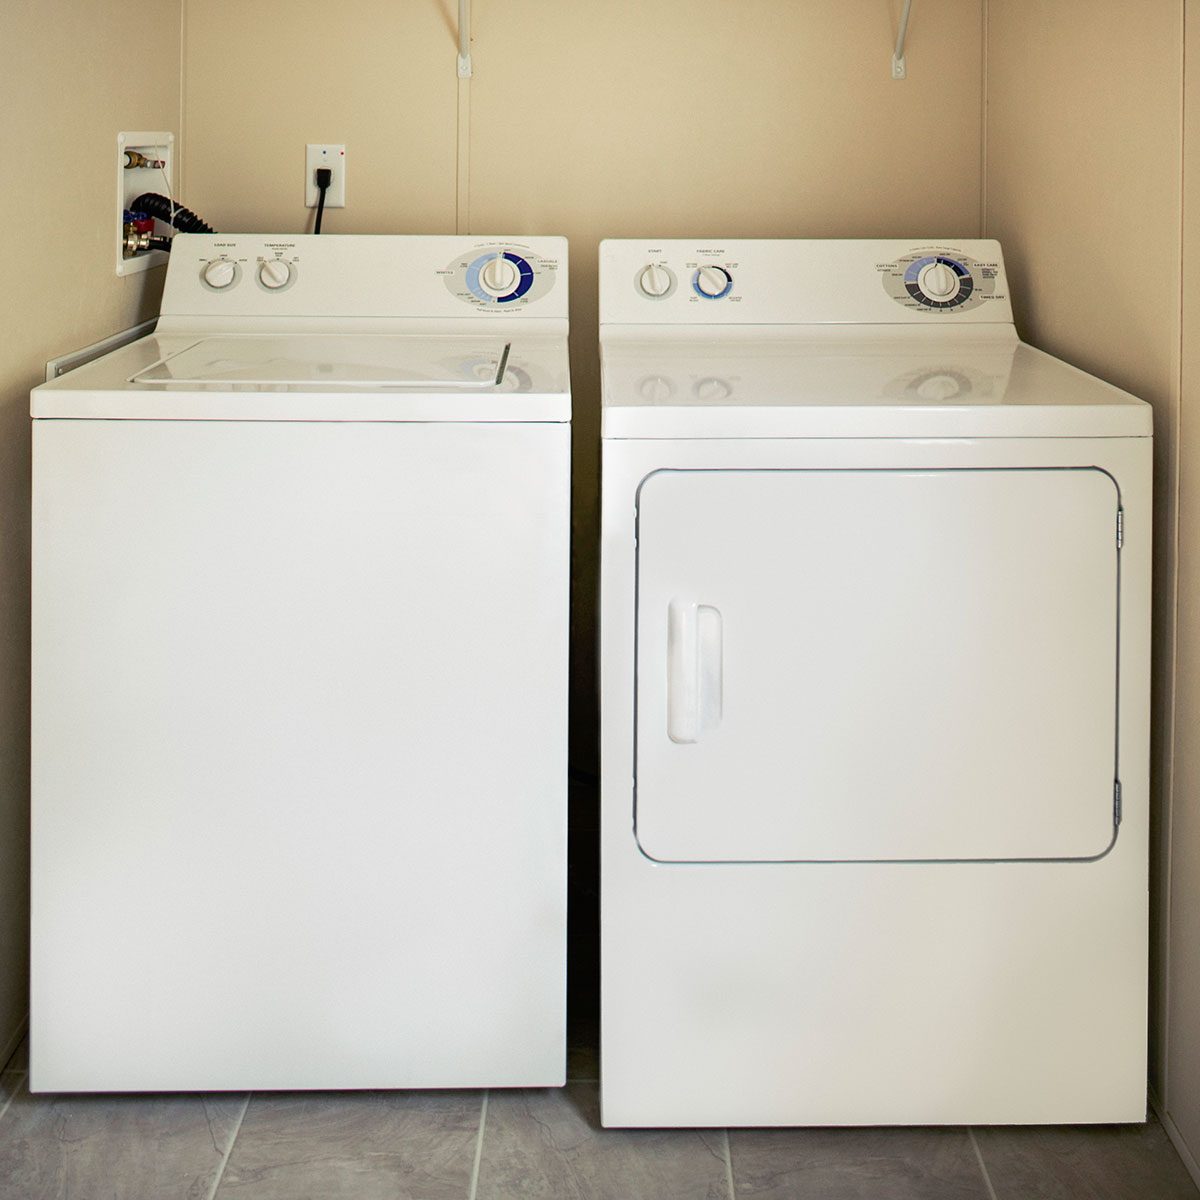 Gas vs. Electric Dryers: What Are the Main Differences?